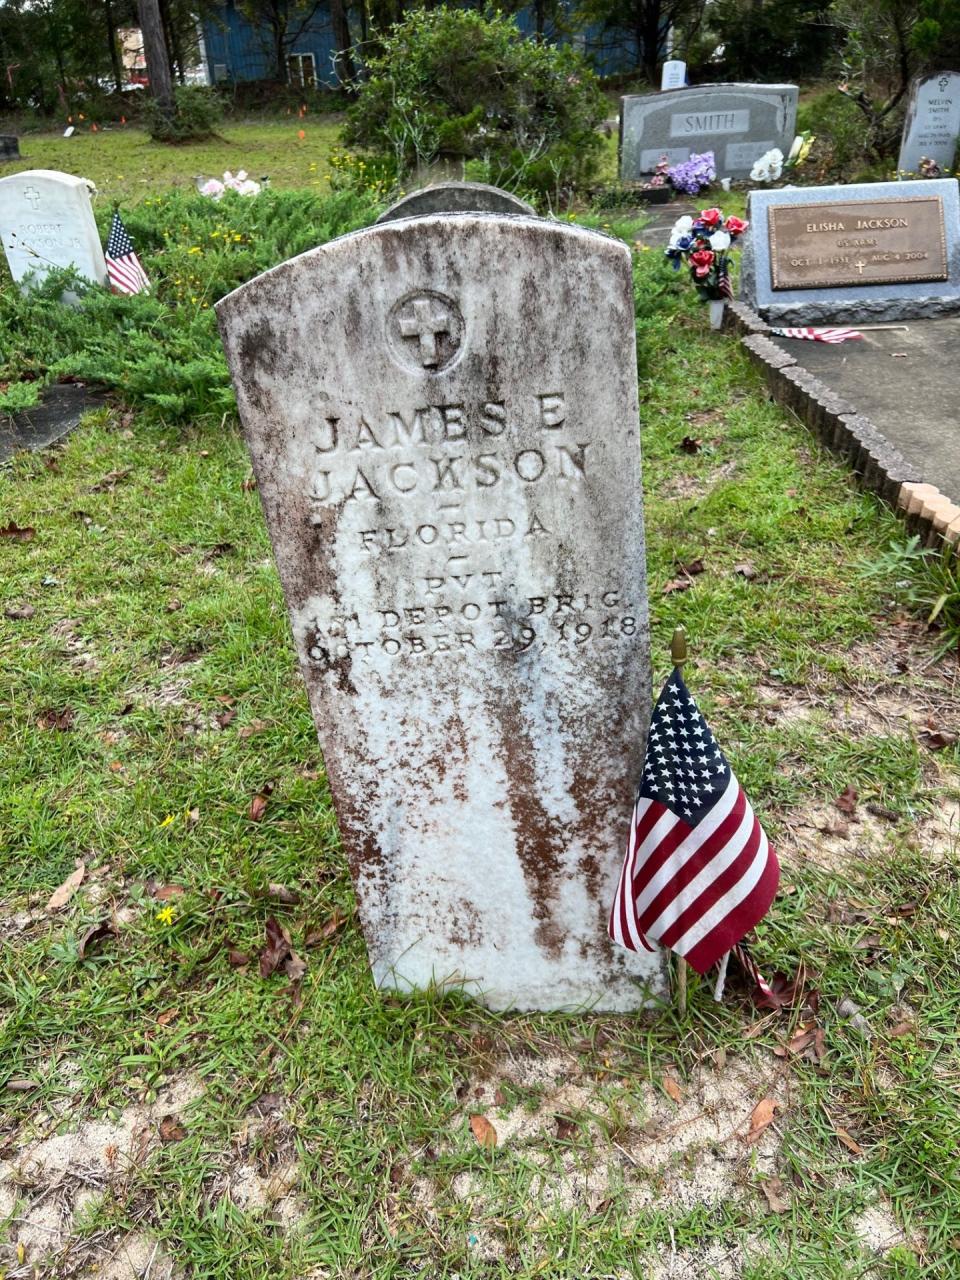 James Jackson is a World War I veteran buried at Richardson Family Cemetery